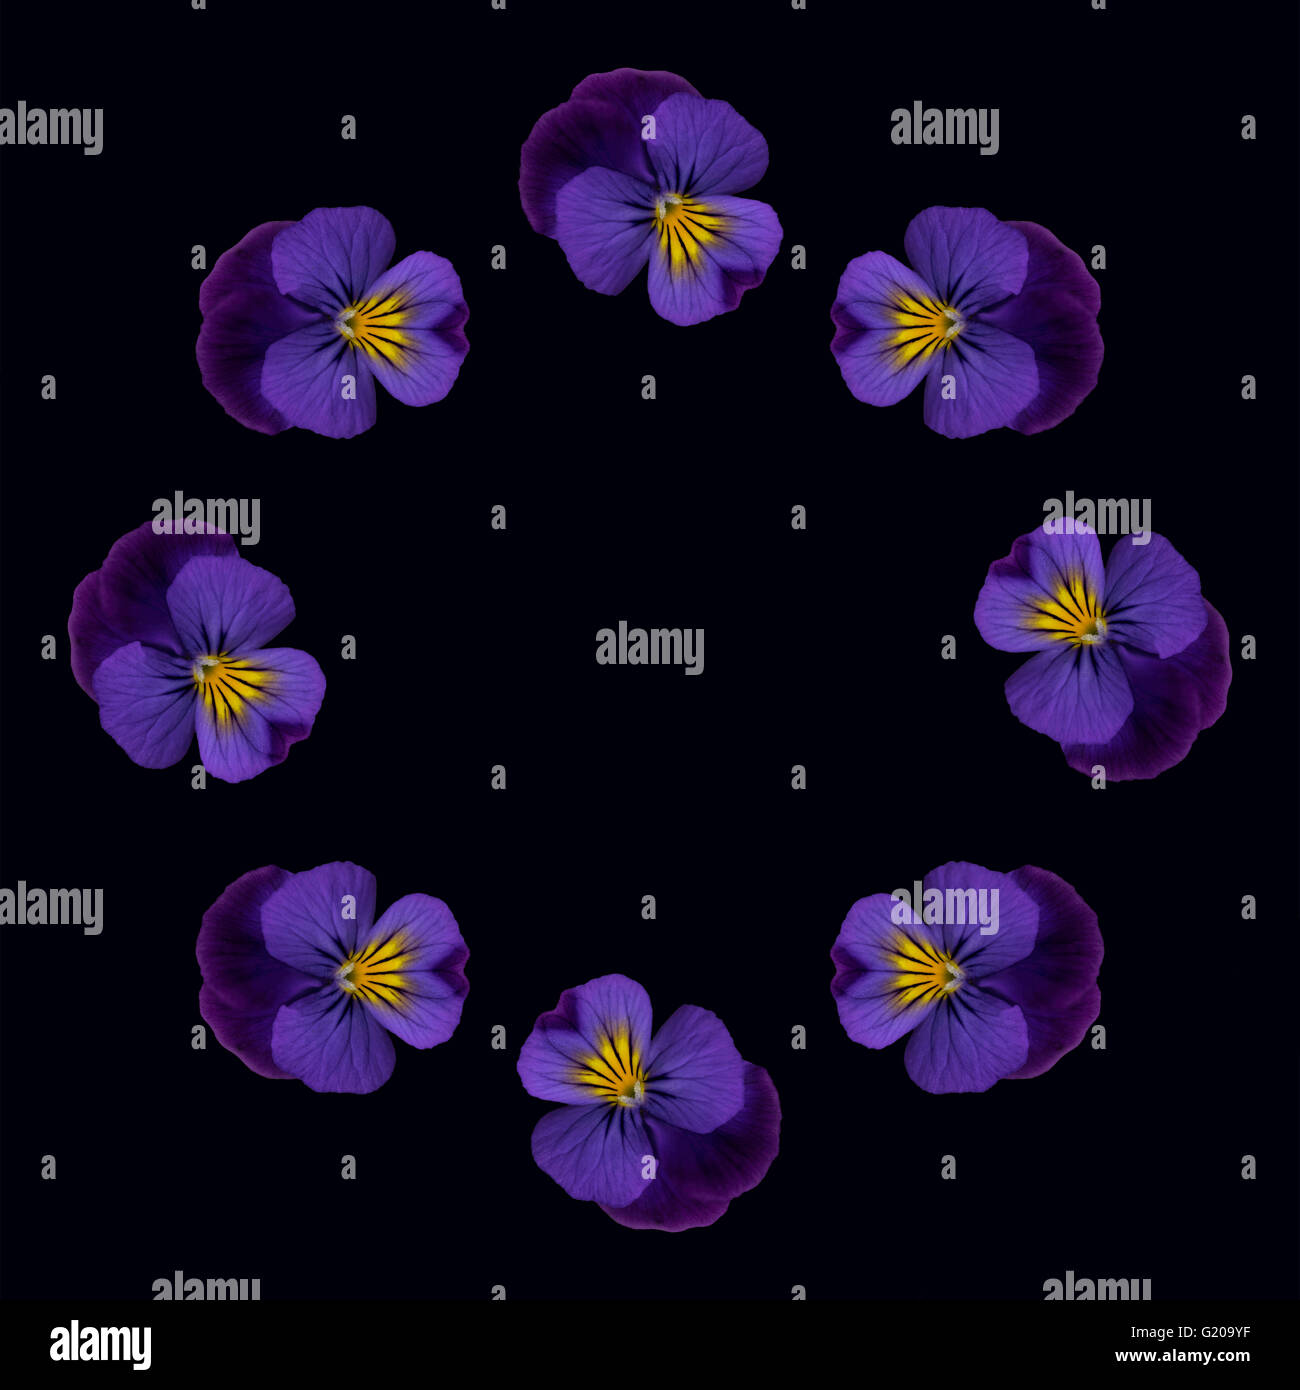 Single pansy repeated to make a circular pattern on black background Stock Photo